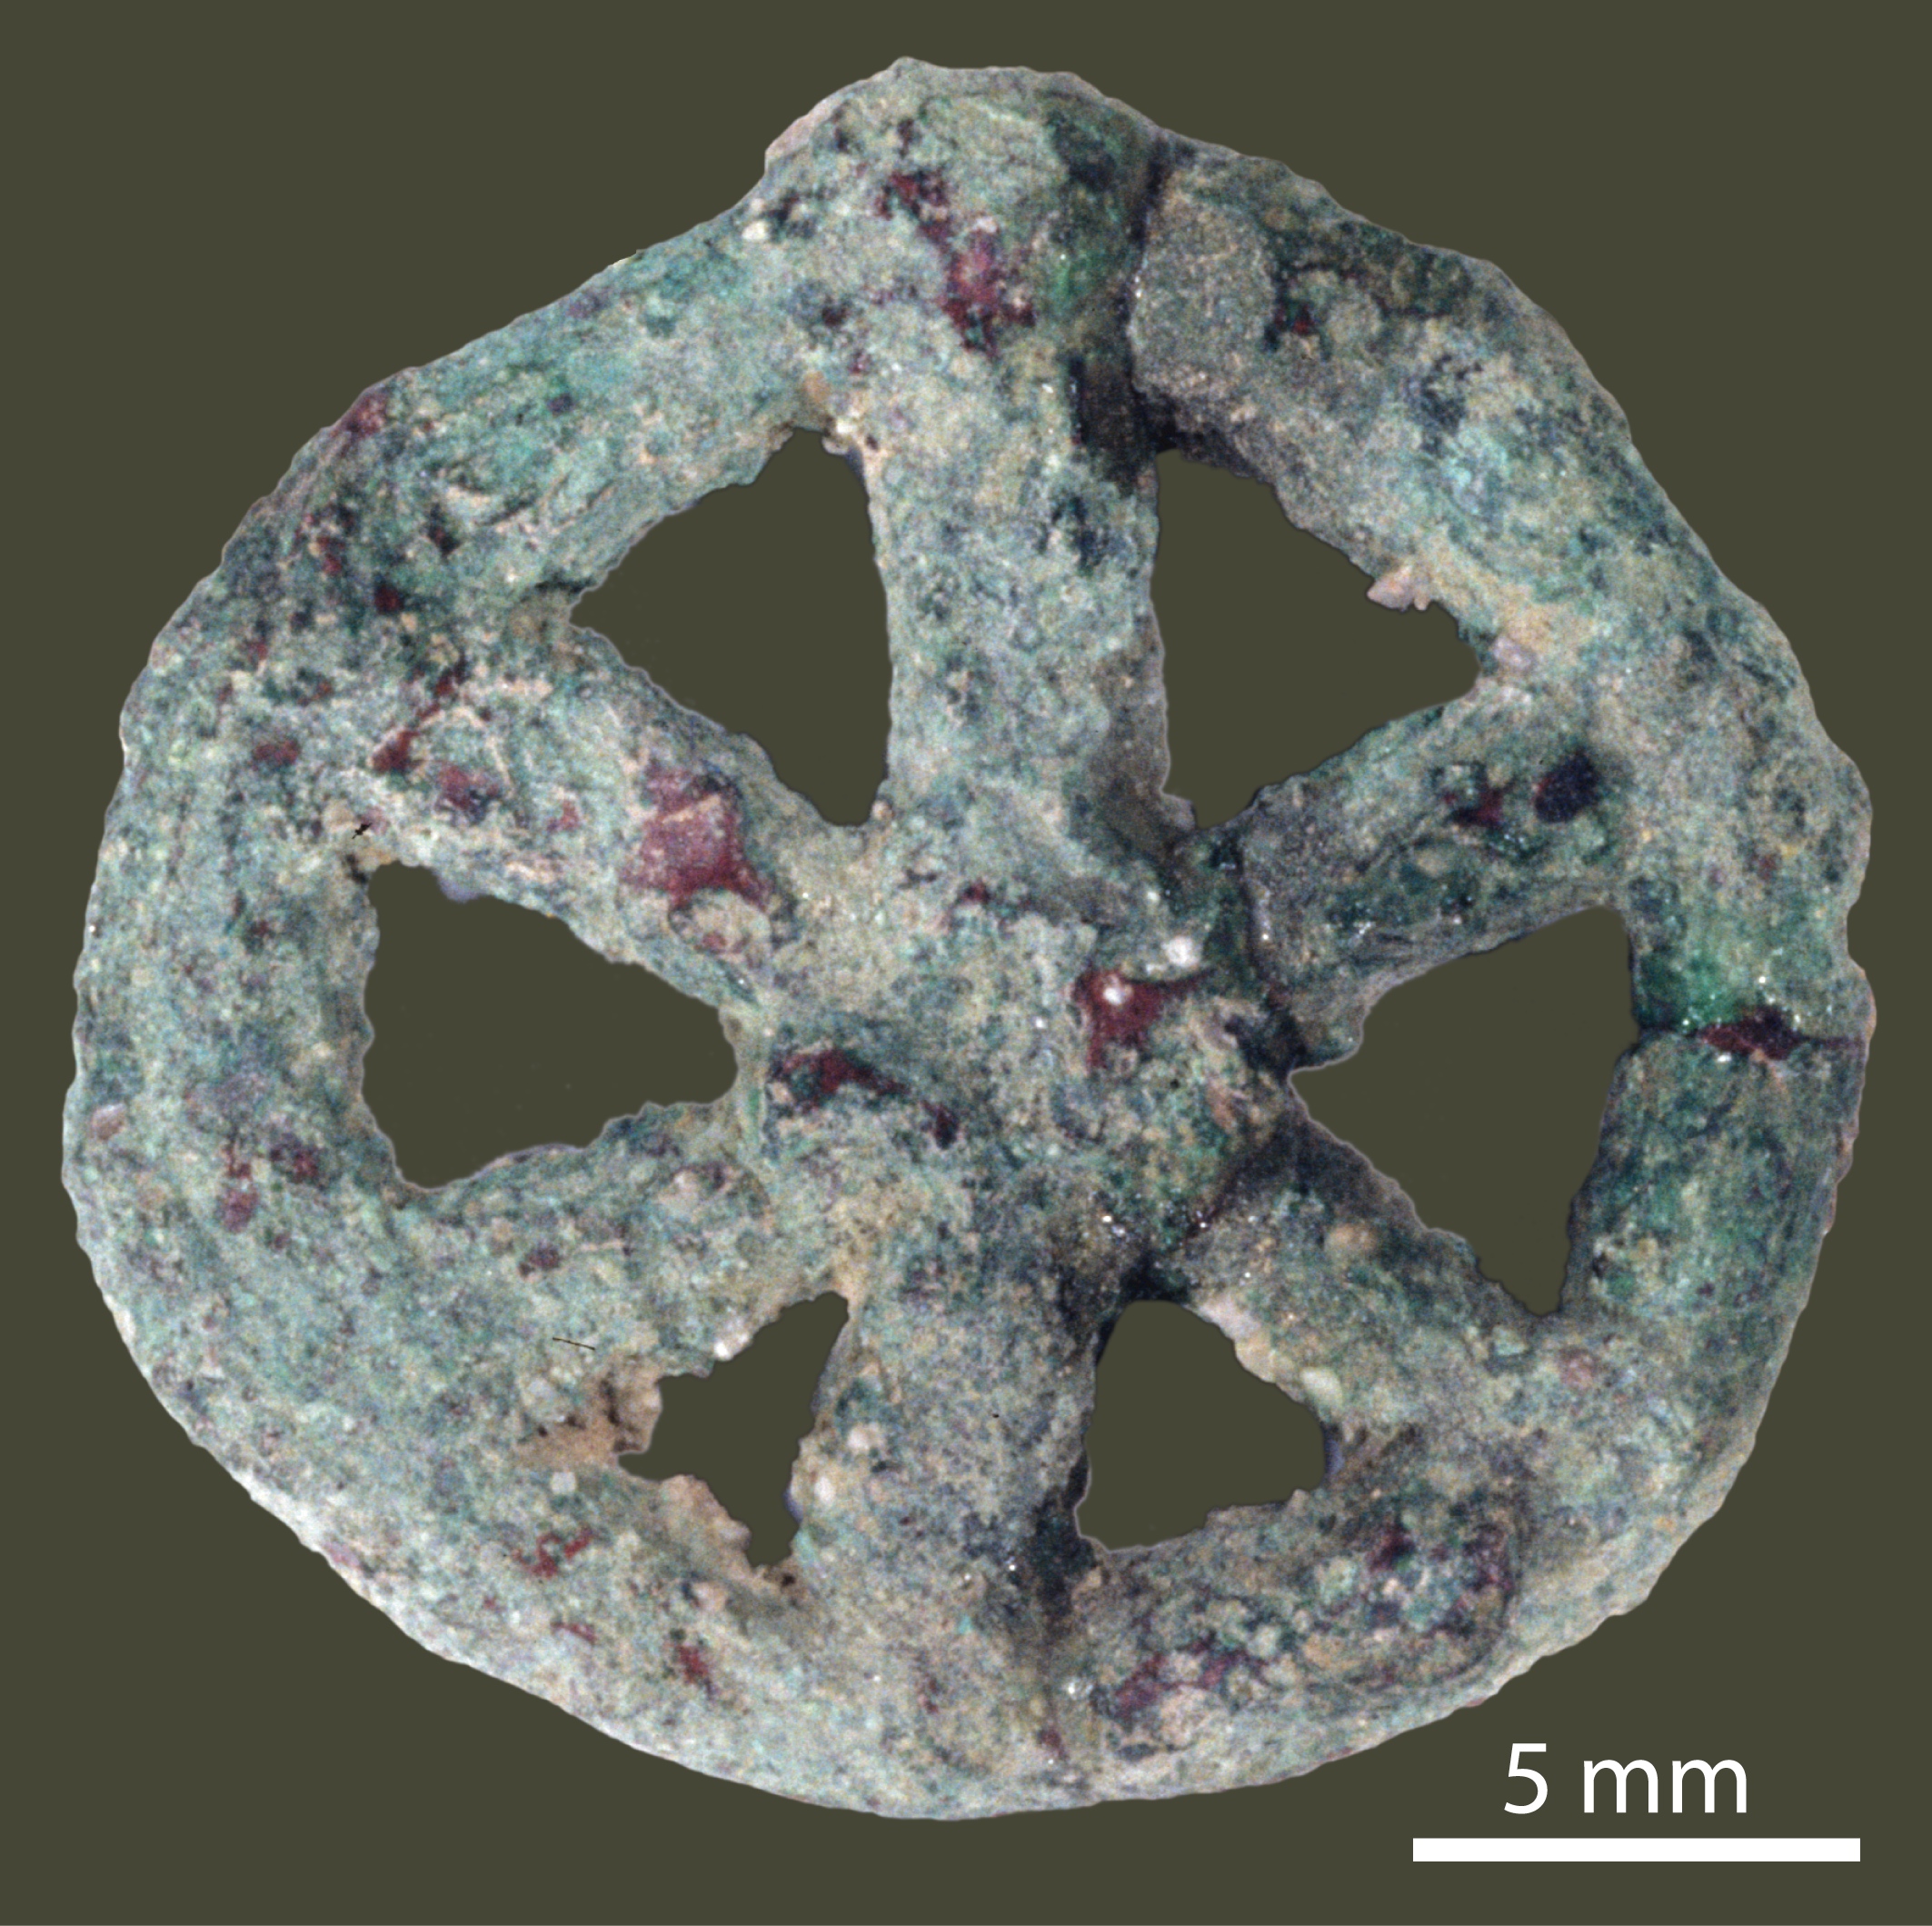 Scientists shine light on the origin of a mysterious ancient amulet